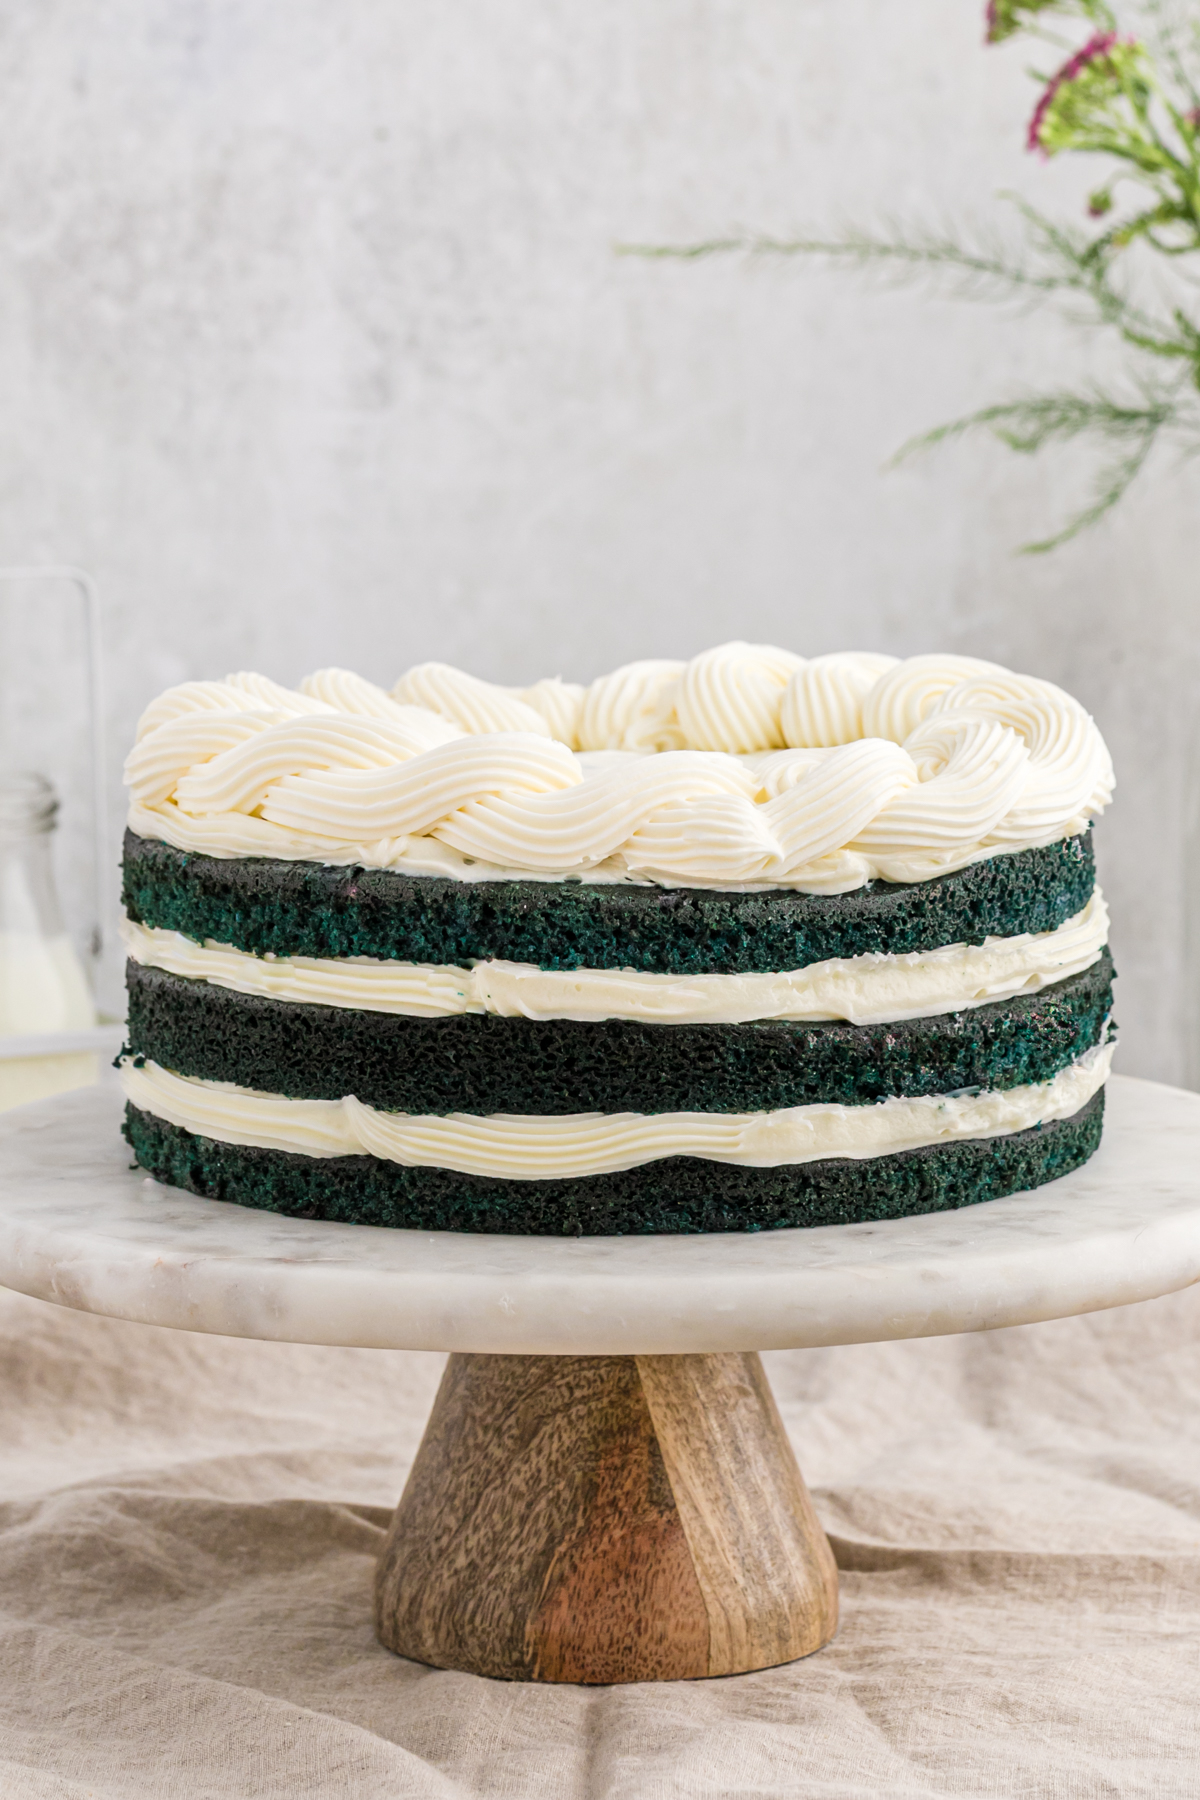 A blue velvet cake recipe with cream cheese frosting on a white cake stand with a wooden bottom against a white background